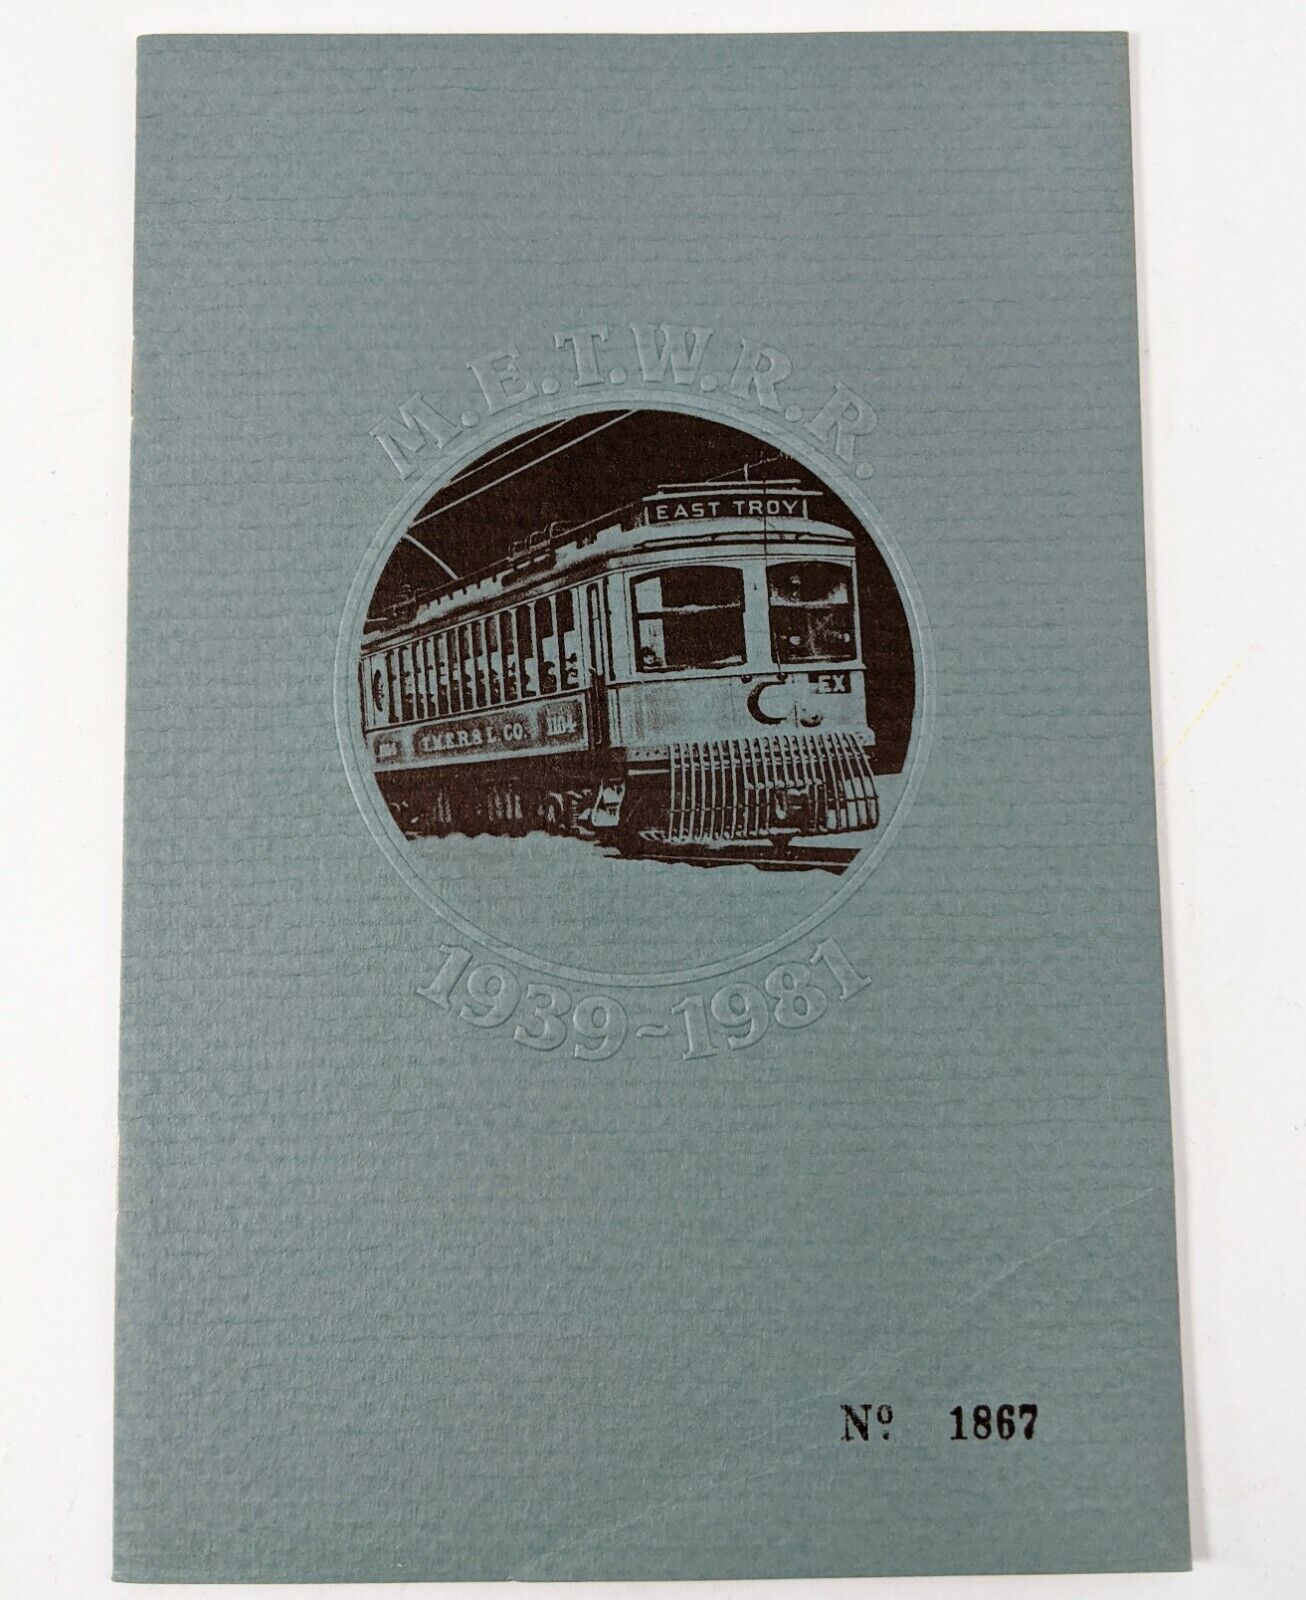 Milwaukee East Troy Wisconsin Railroad RR 1039-1981 Booklet